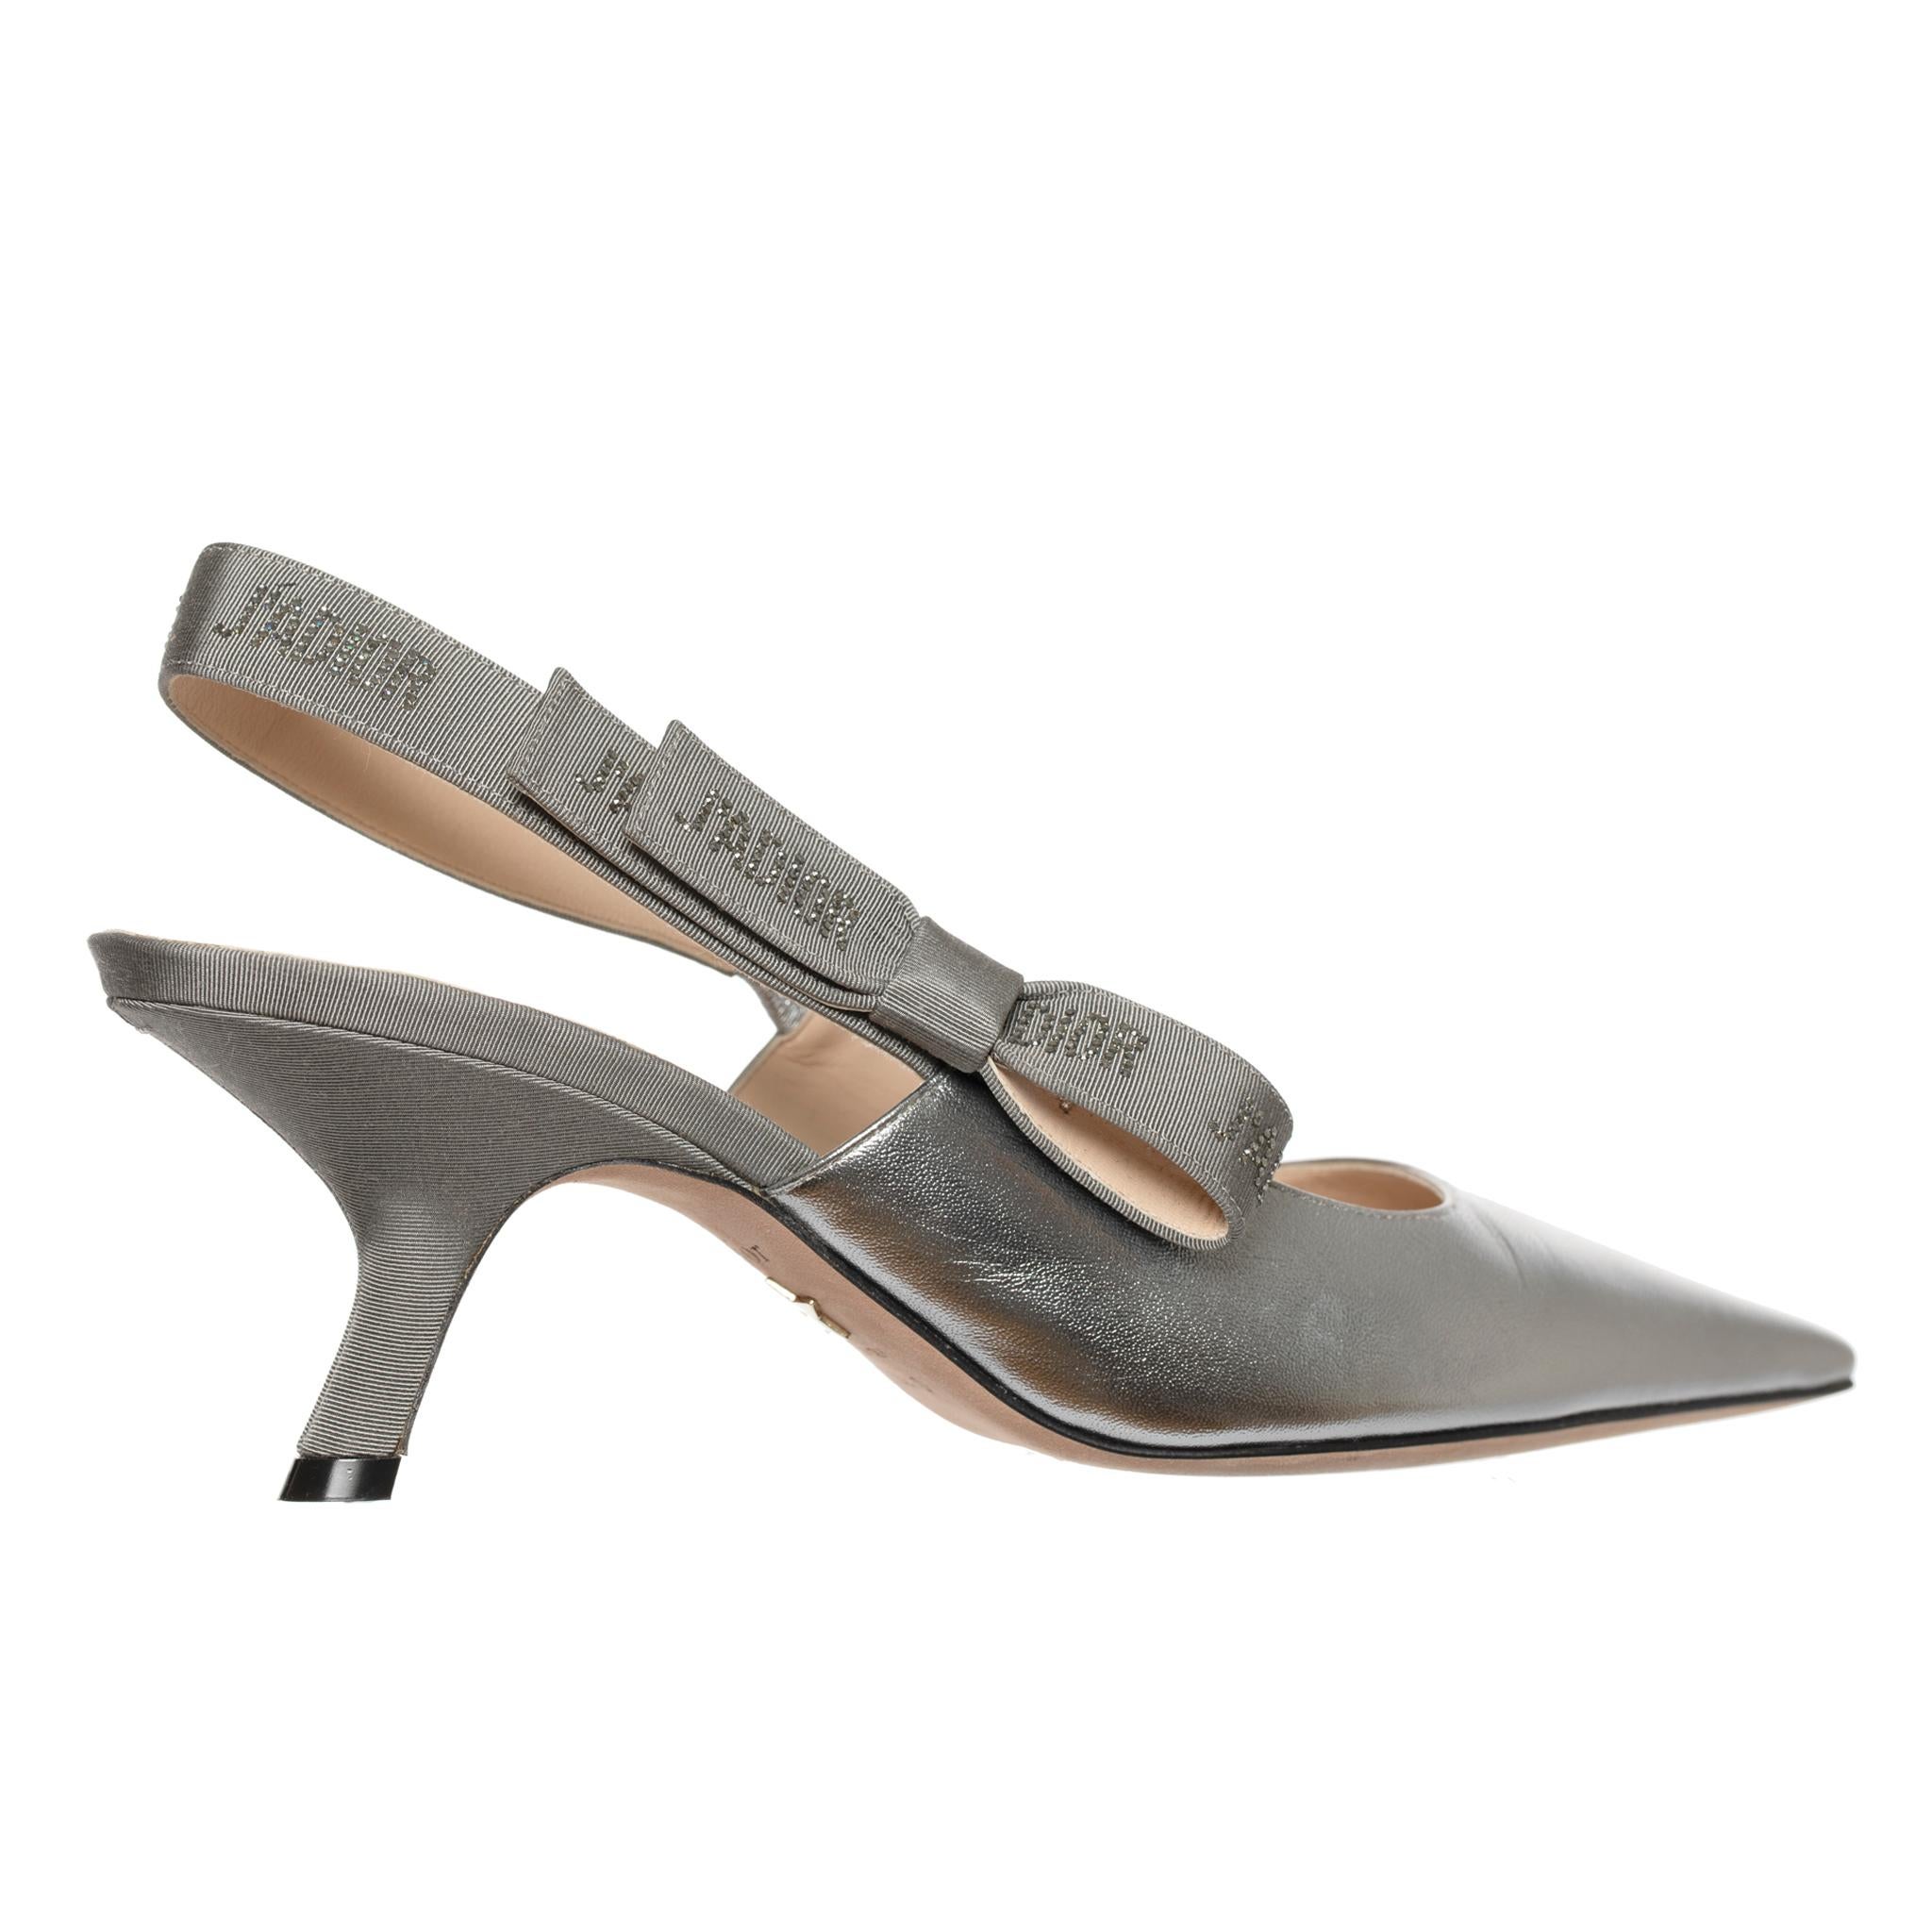 Christian Dior De Jouy J'adior Slingback Kitten Heel

Brand:

Christian Dior

Product:

Pointed Slingback J'adior Kitten Heel With Rhinestone Details

Size:

39.5 Fr

Colour:

Metallic Silver

Heel:

7.5 Cm

Material:

Smooth